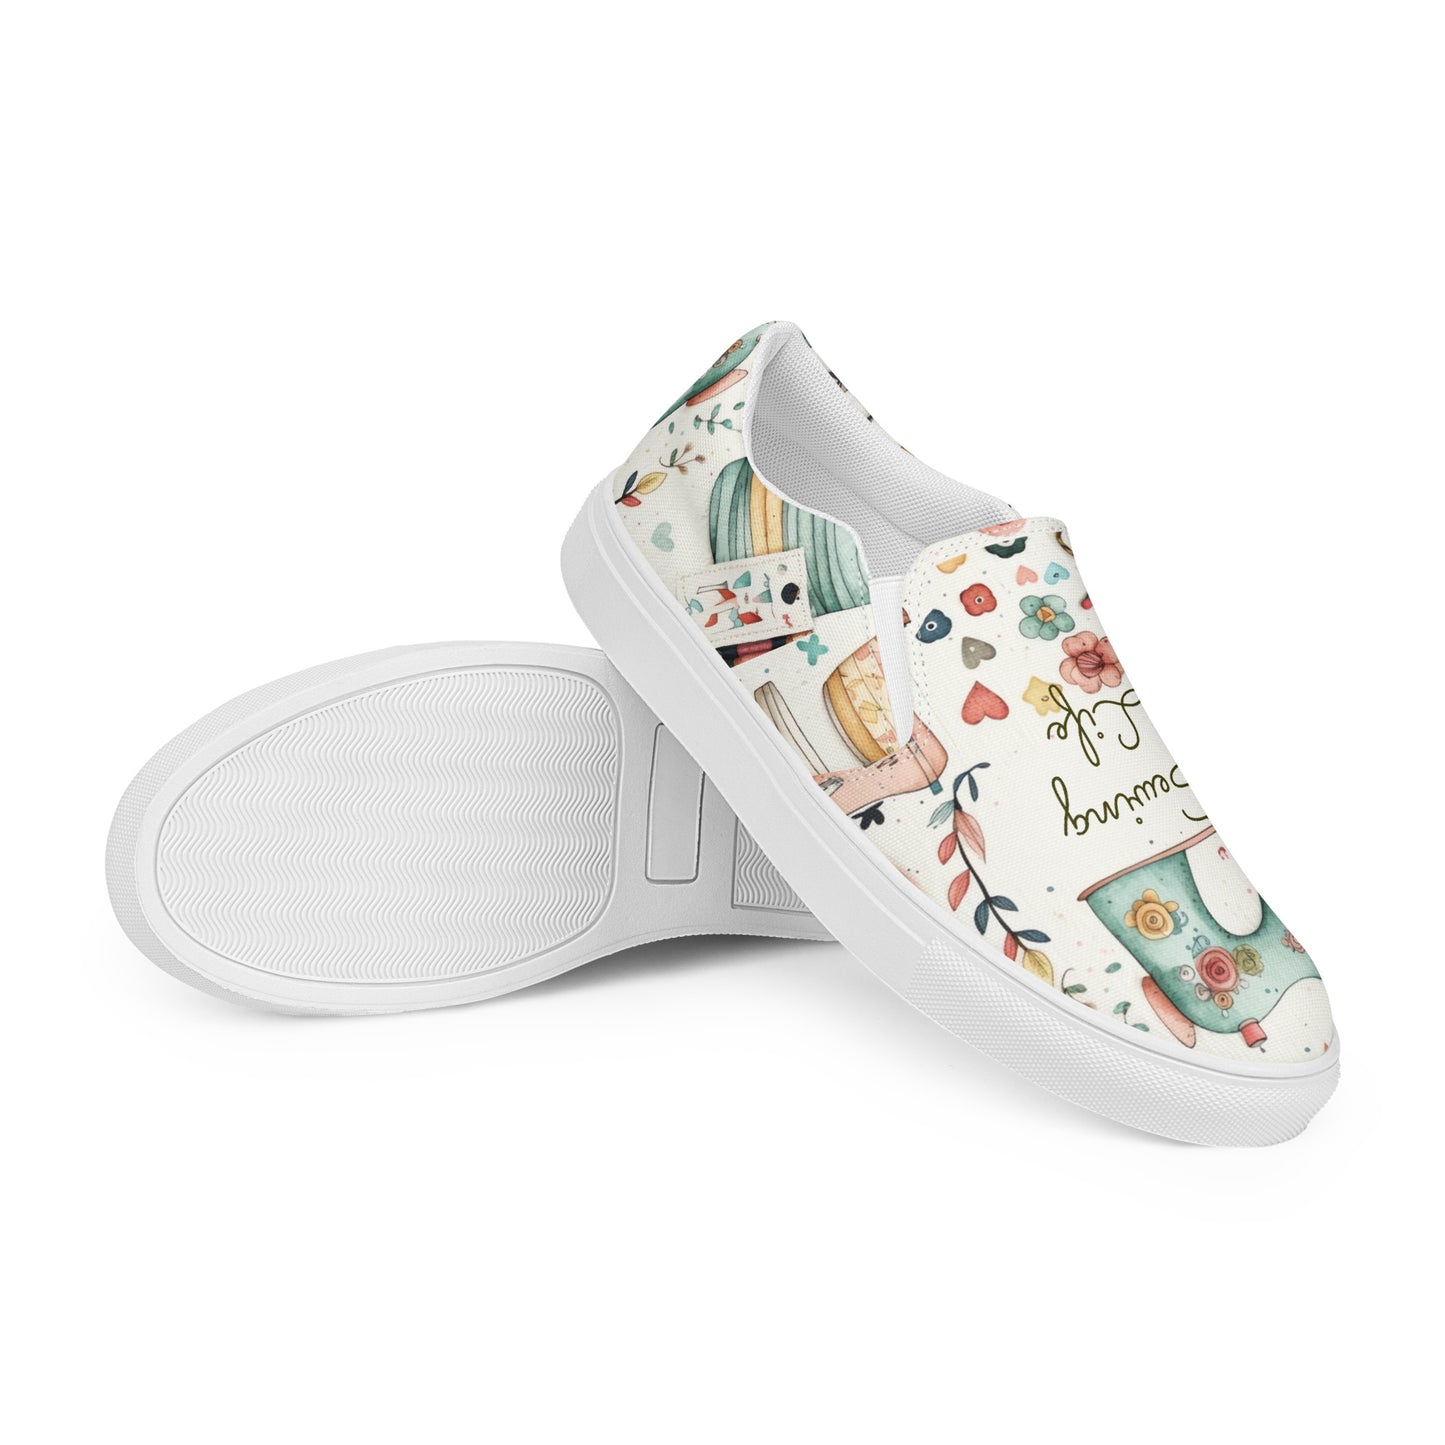 Sewing Life Women’s slip-on canvas shoes CedarHill Country Market